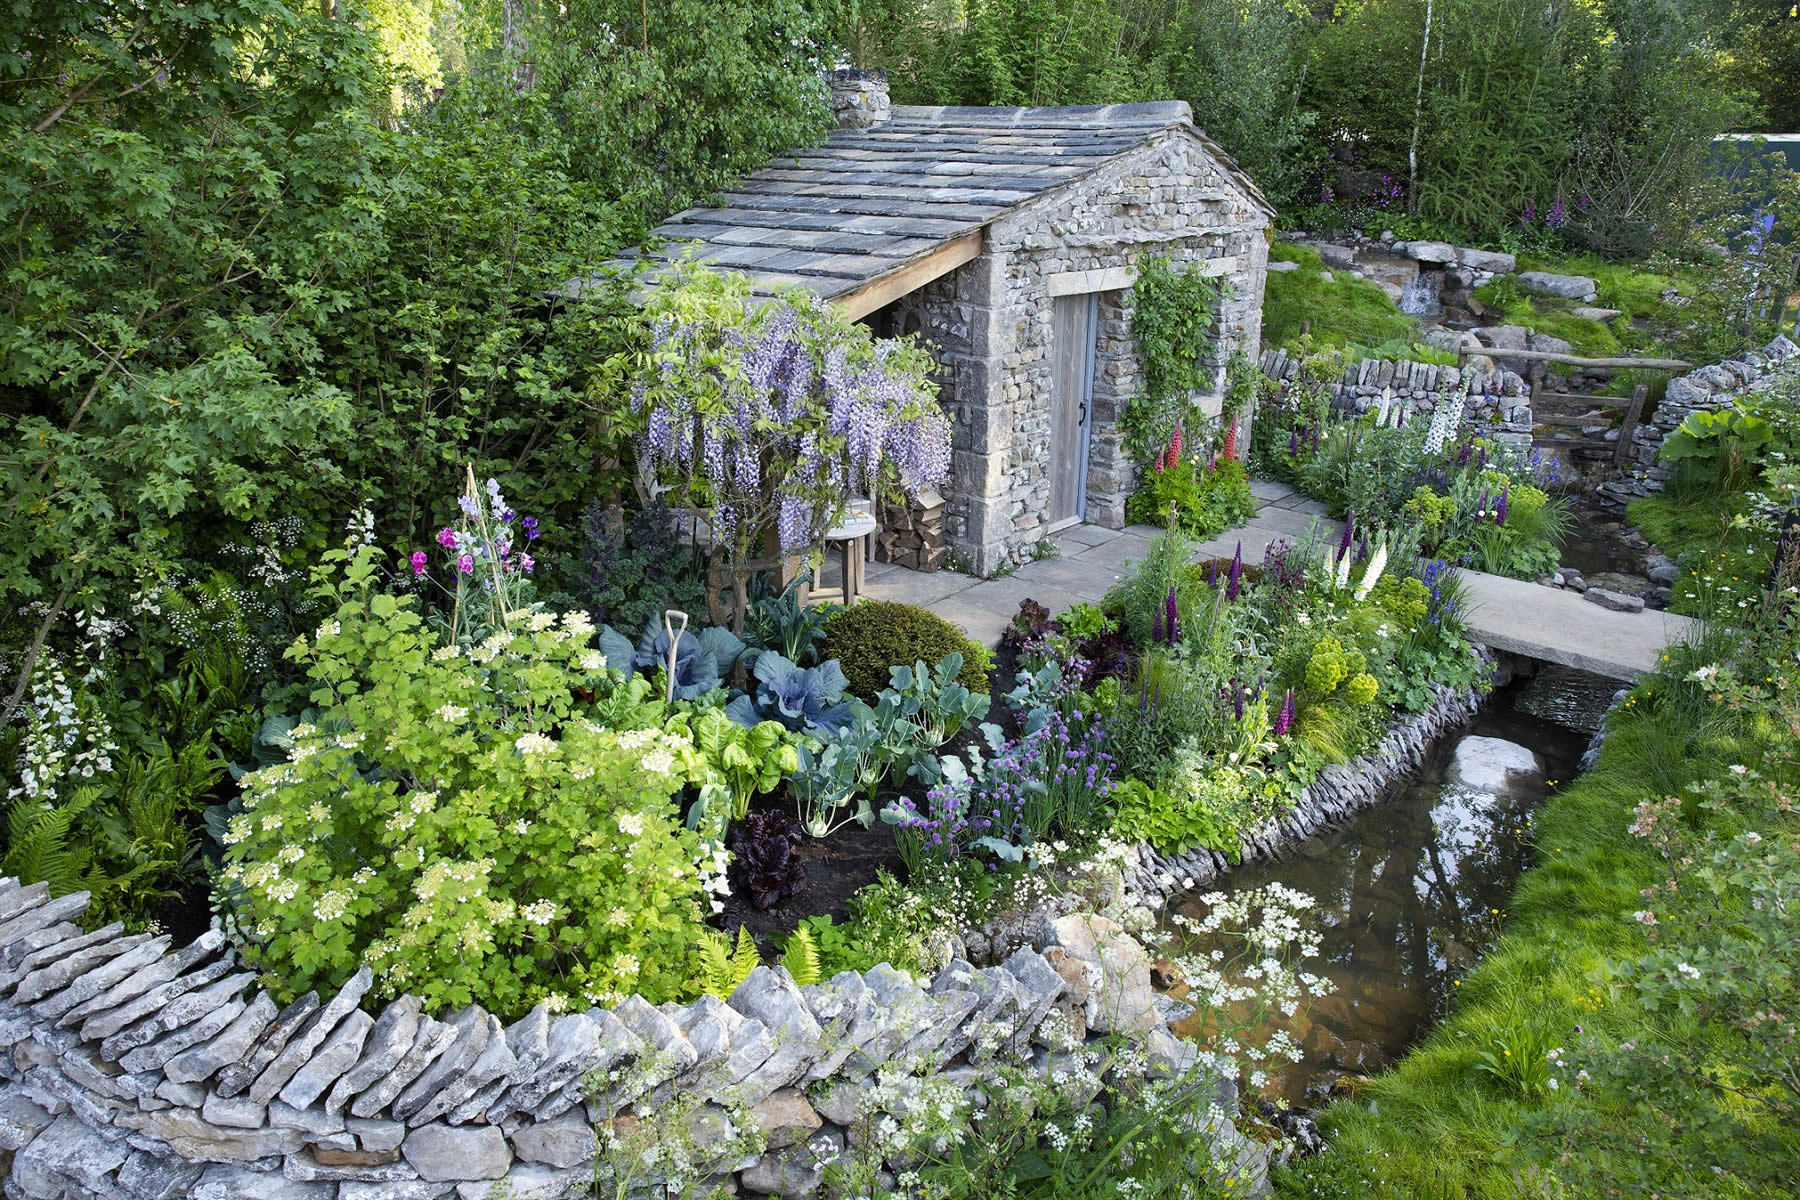 Welcome to Yorkshire Garden at the 2019 Chelsea Flower Show